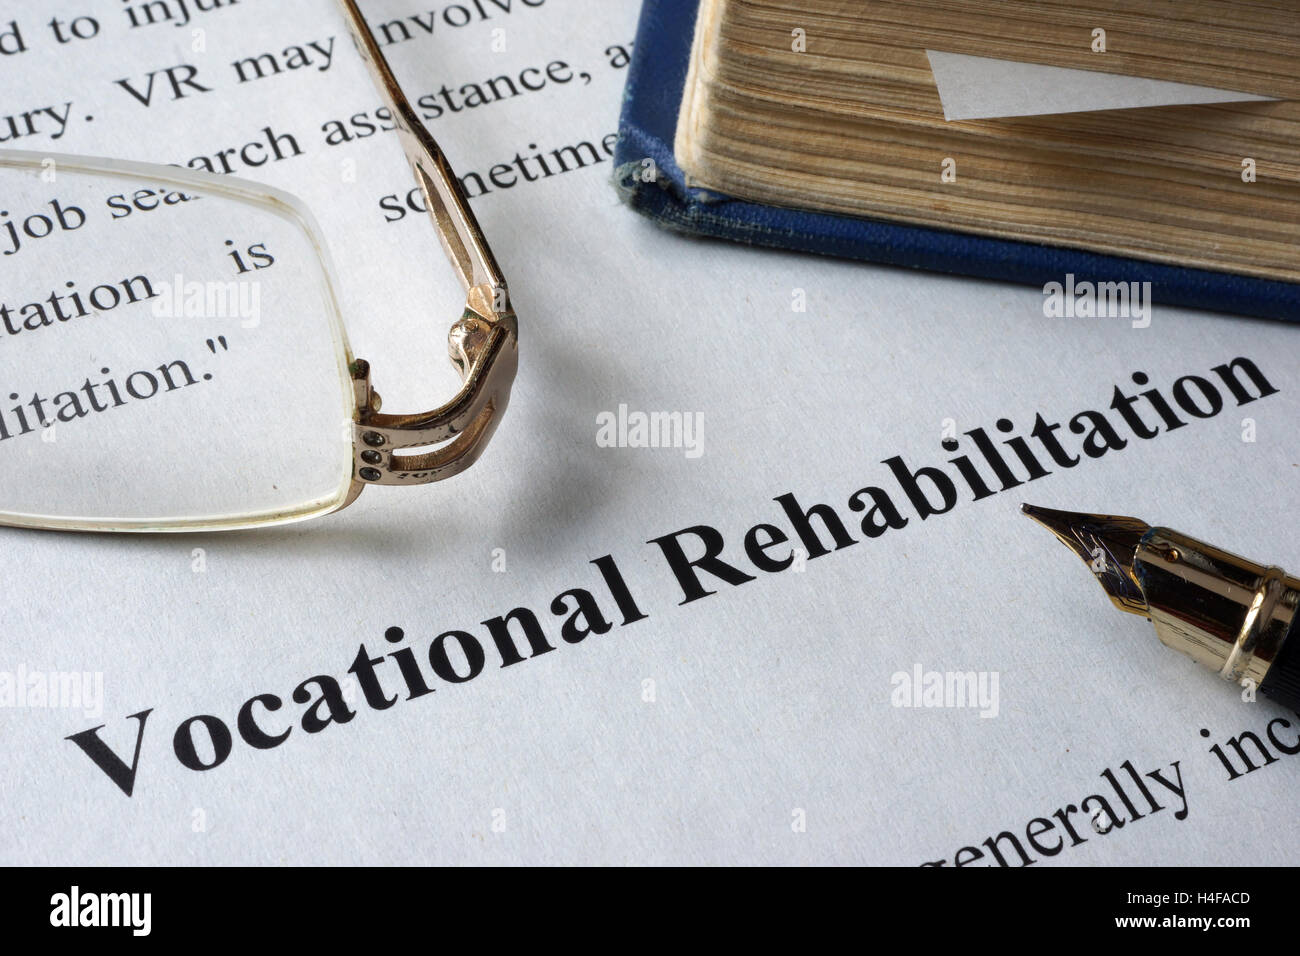 Vocational Rehabilitation written on a paper and a book. Stock Photo